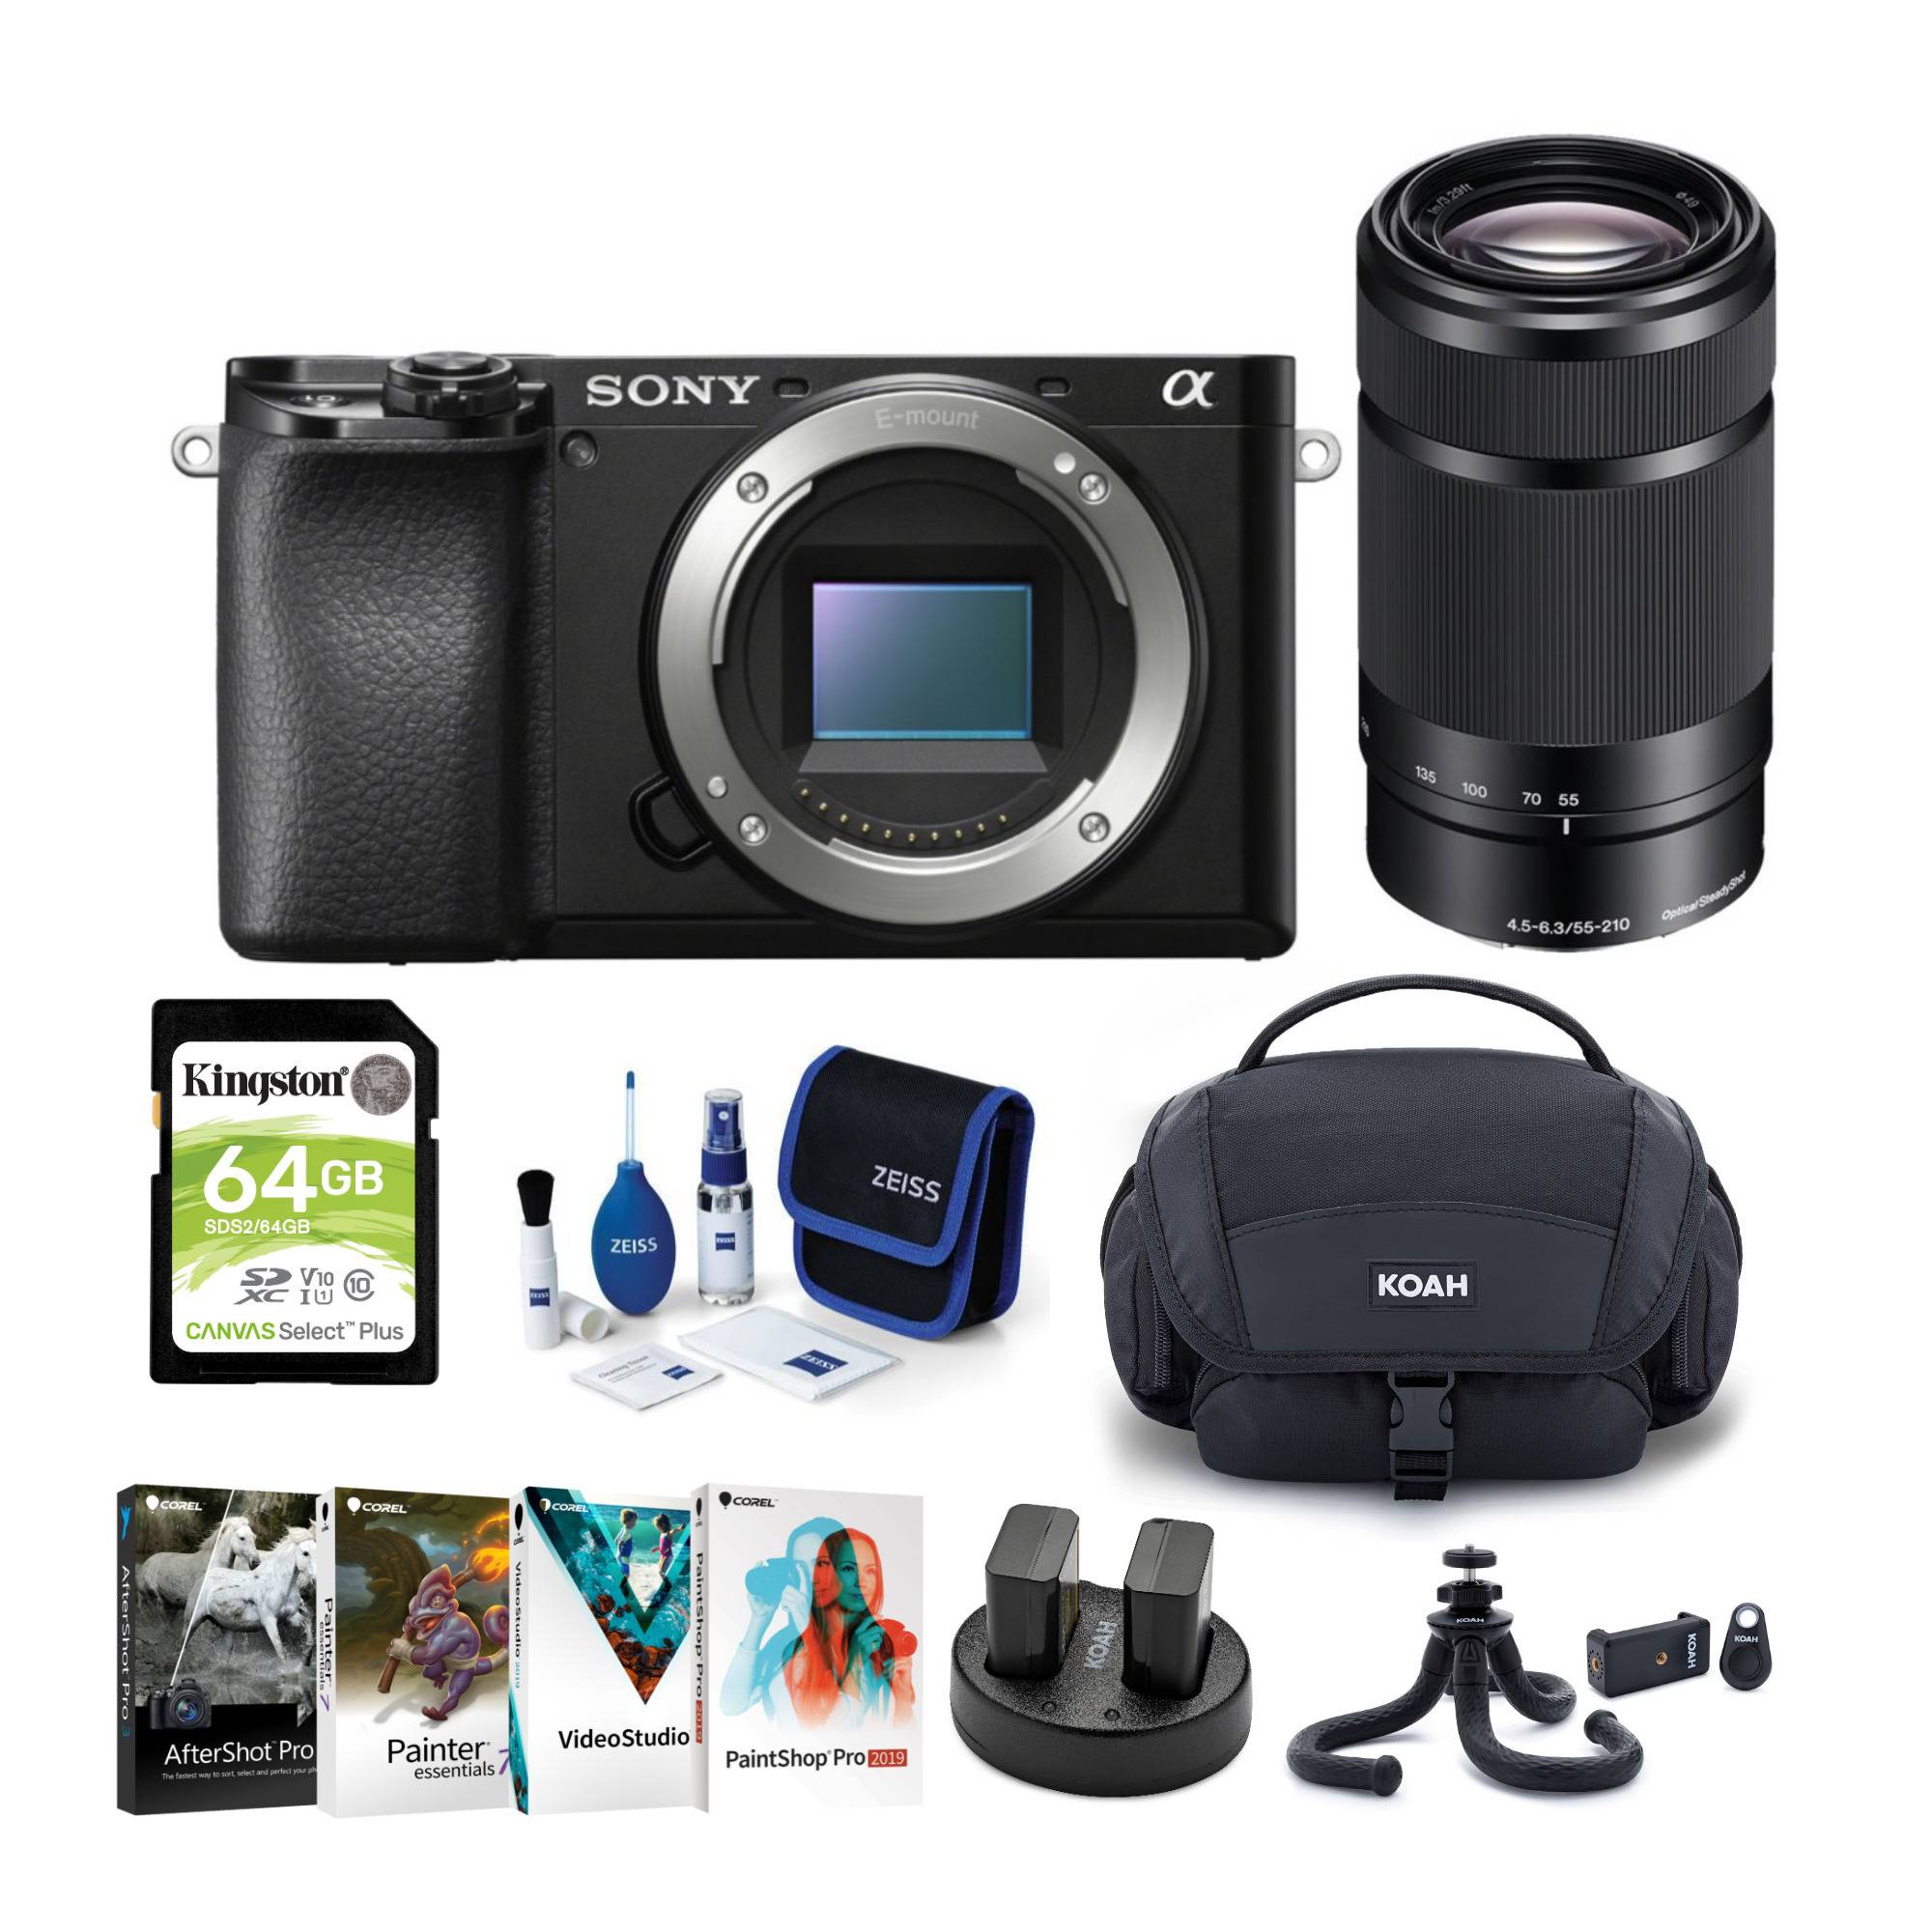 Sony Alpha a6100 APS-C Mirrorless Camera Body with 55-210mm f/4.5-6.3 Lens and Soft Case Bundle